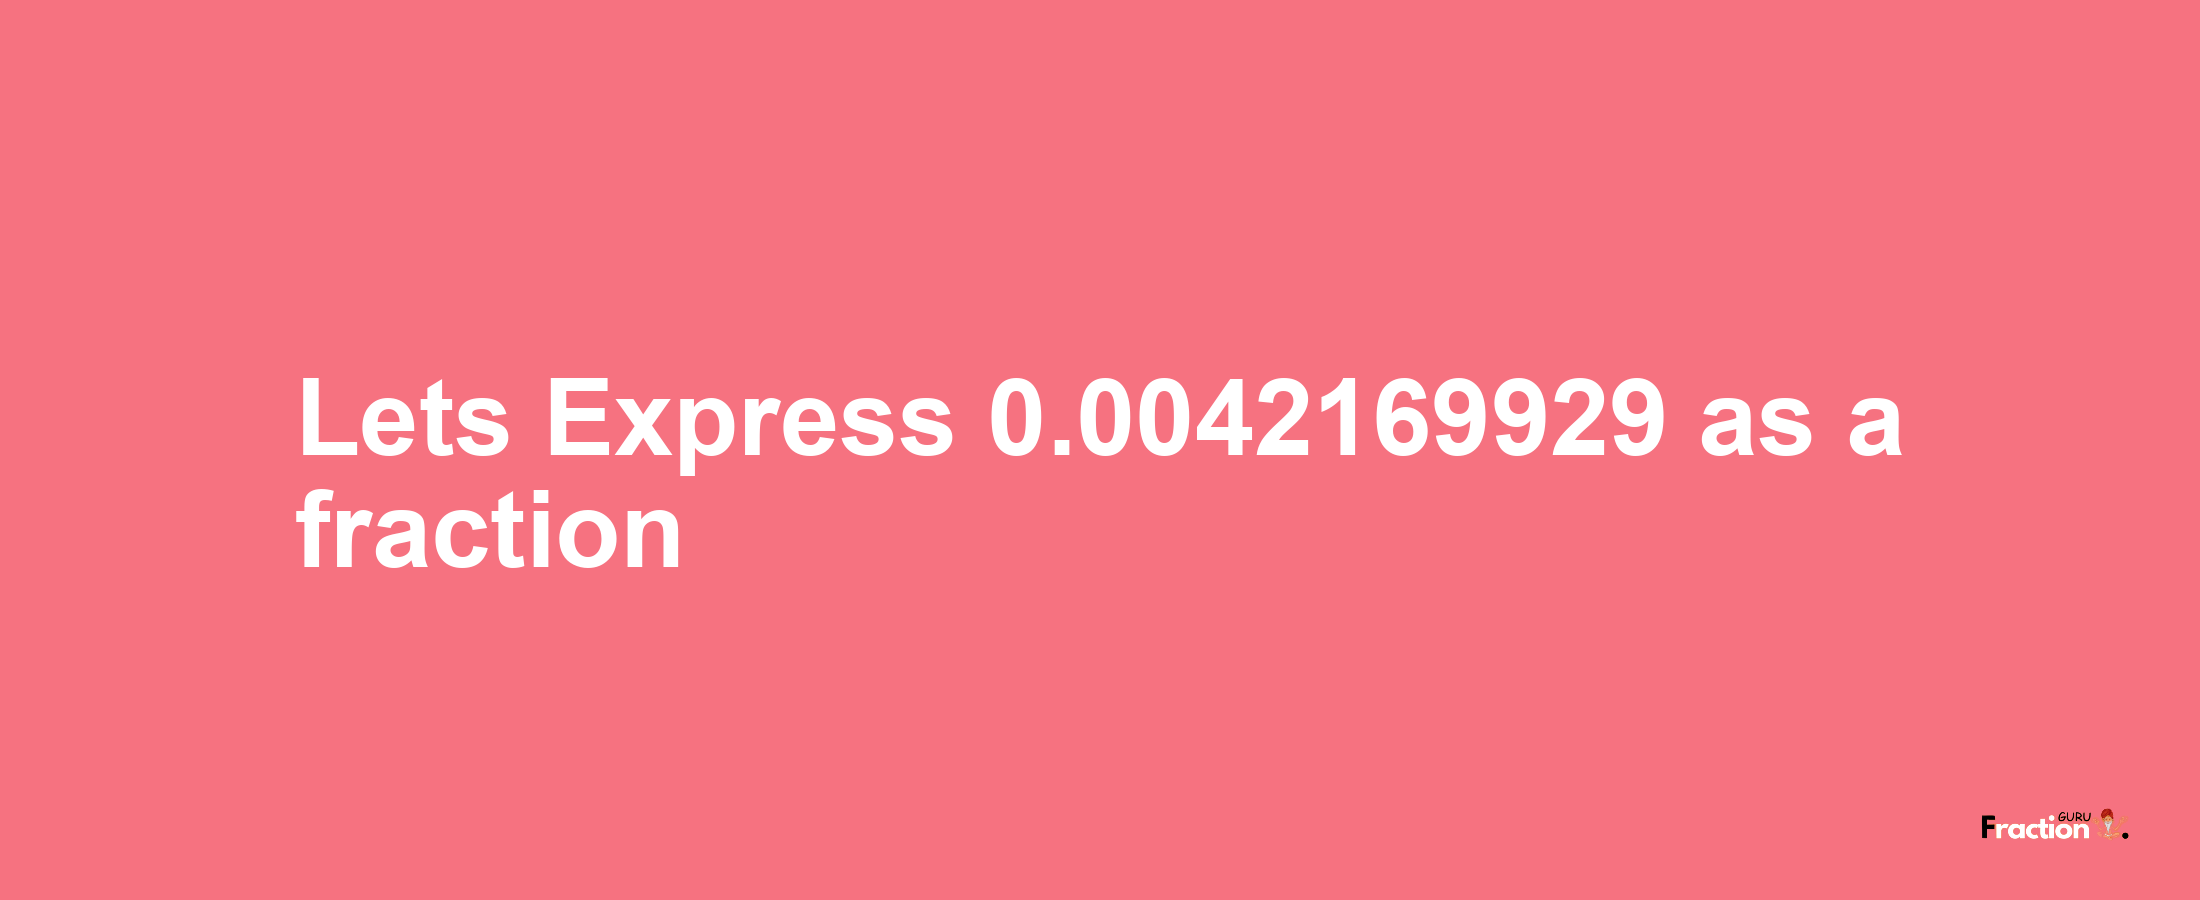 Lets Express 0.0042169929 as afraction